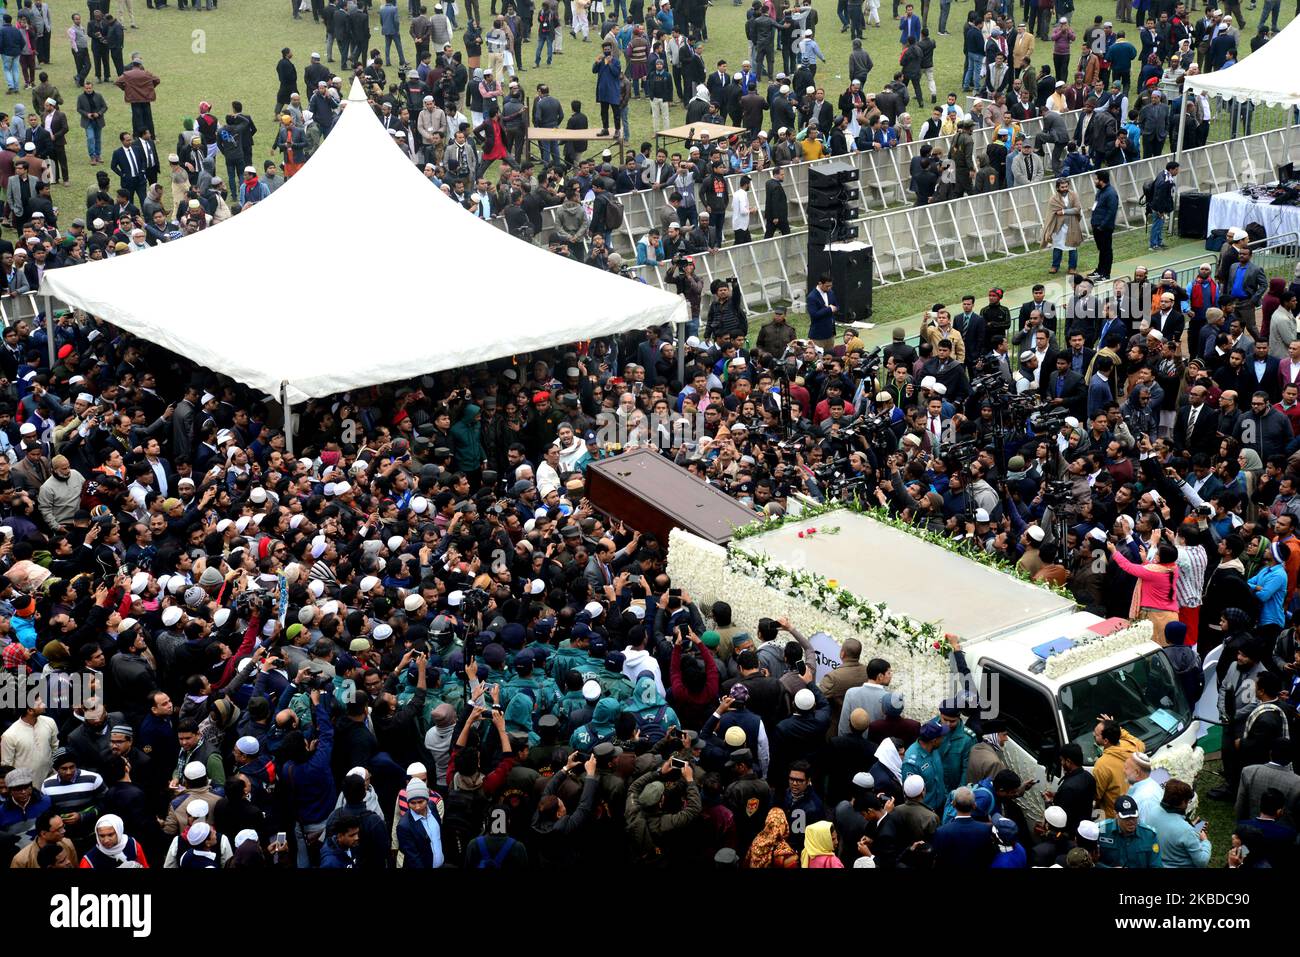 People offer funeral prayers for Sir Fazle Hasan Abed, the founder of the Bangladesh Rural Advancement Committee (BRAC), in Dhaka, Bangladesh, on December 22, 2019. Thousands gathered in Bangladesh's capital on December 22 to attend the funeral of Sir Fazle Hasan Abed, founder of BRAC, one of the world's largest NGOs, to show their final respect. (Photo by Mamunur Rashid/NurPhoto) Stock Photo